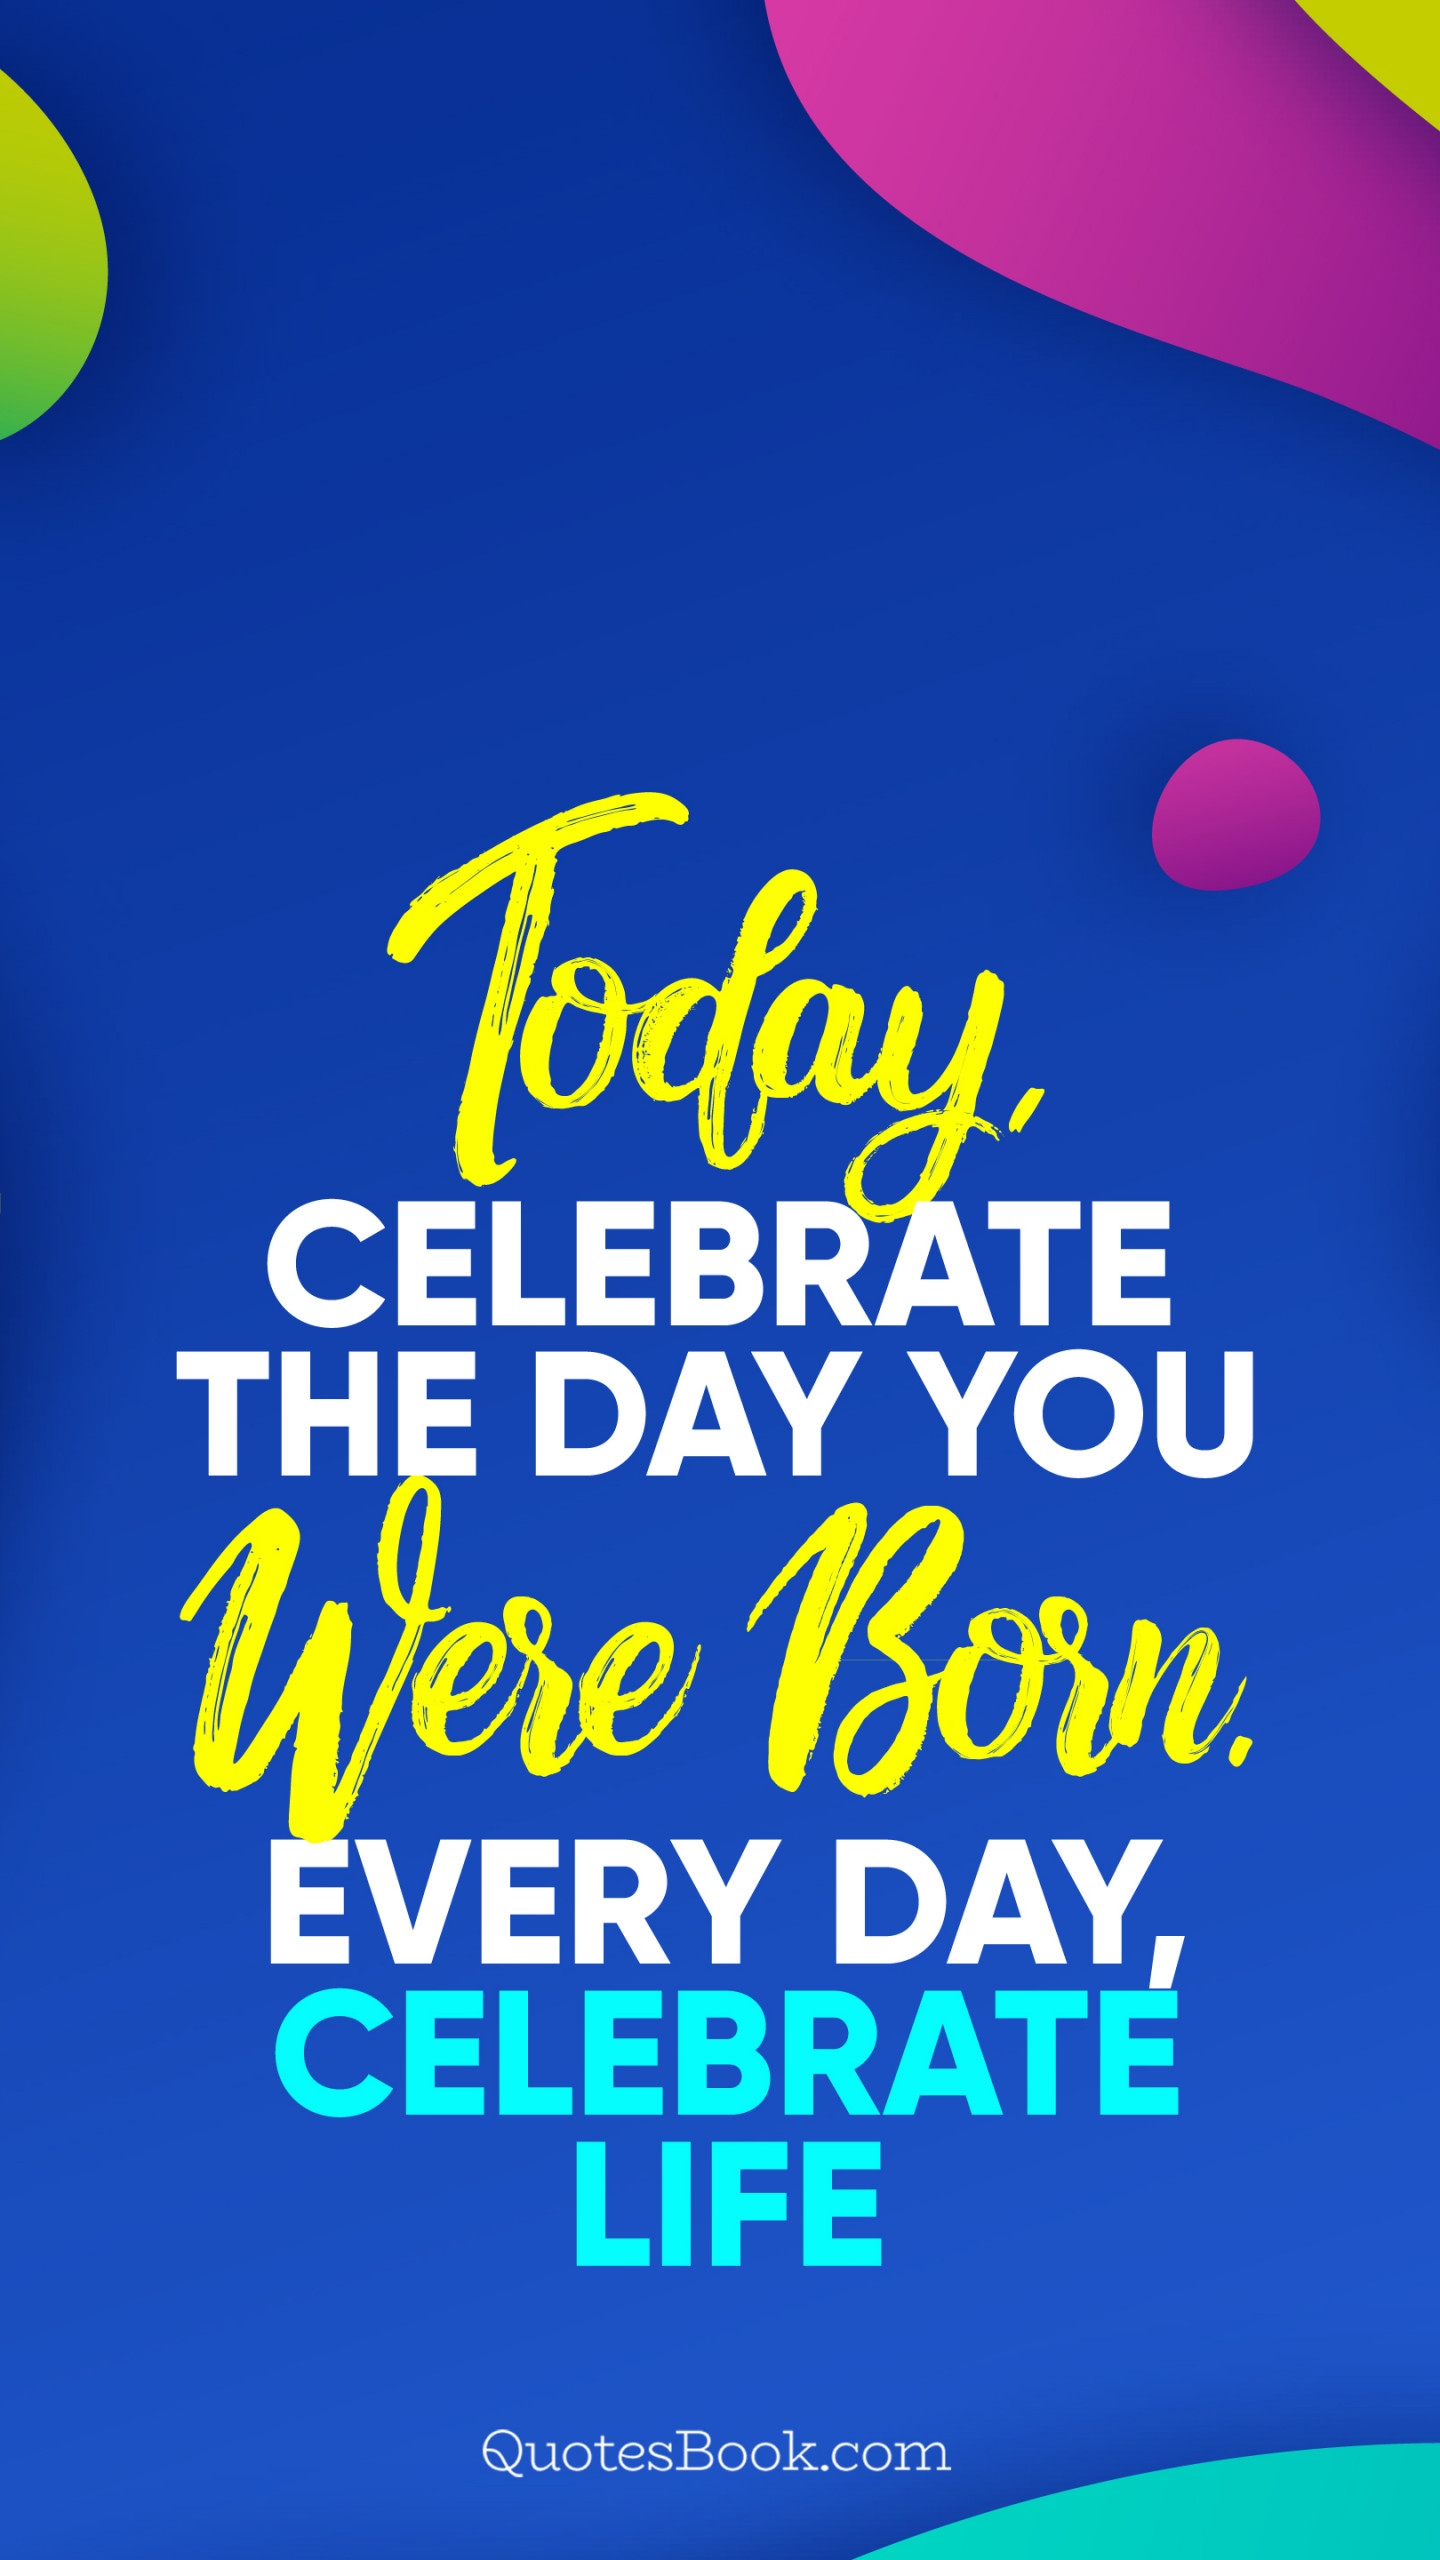 Today, celebrate the day you were born. Every day, celebrate life